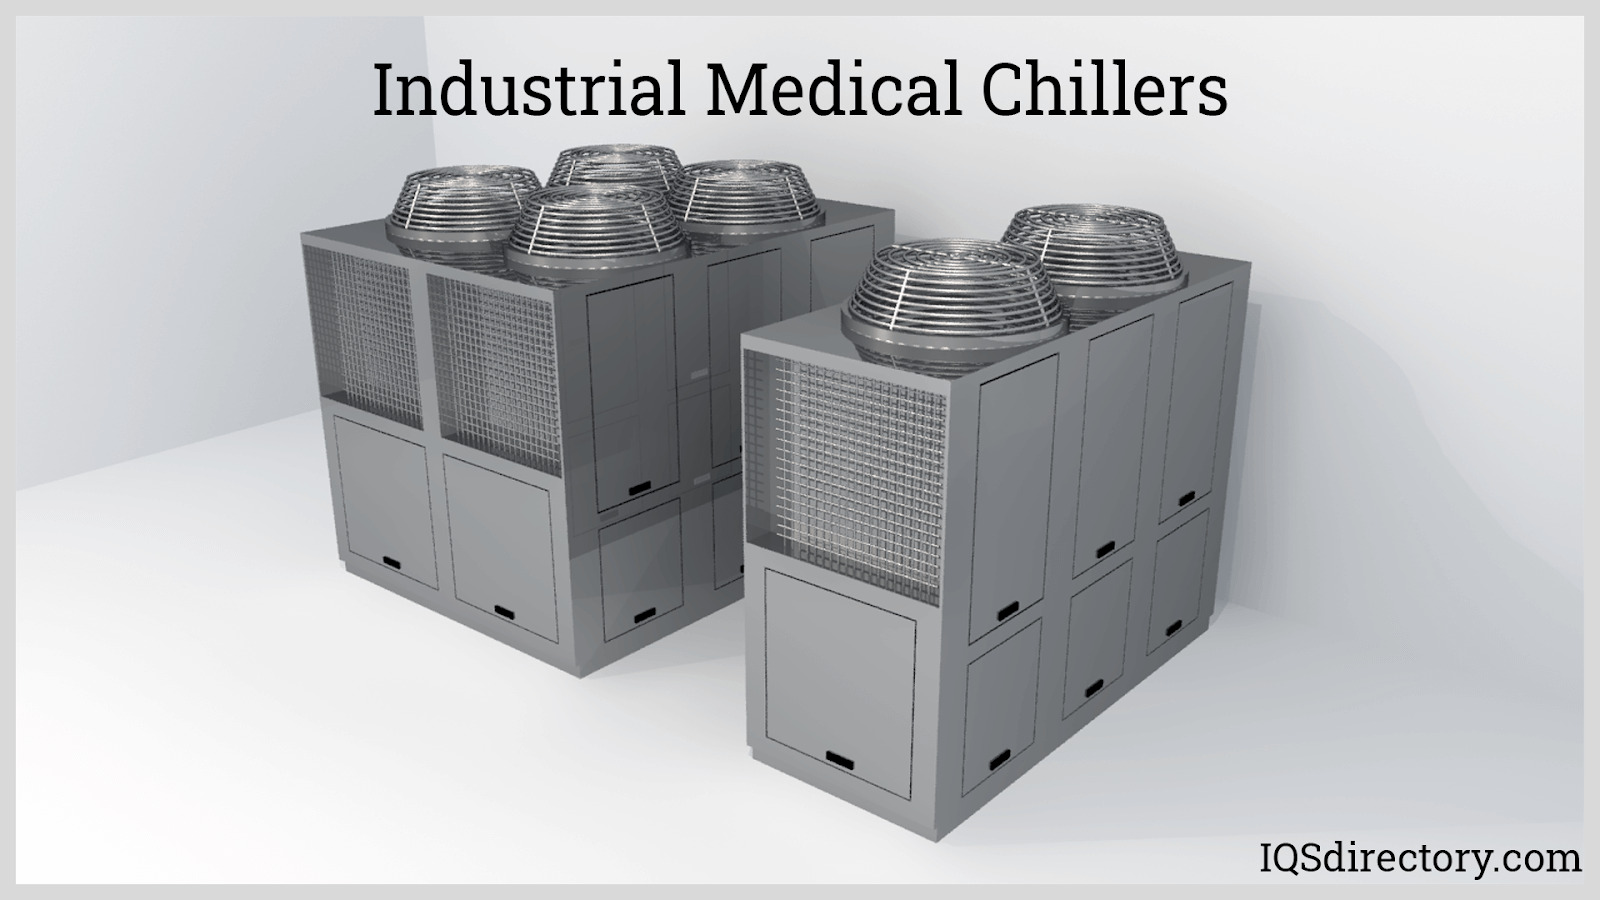 Industrial Medical Chillers